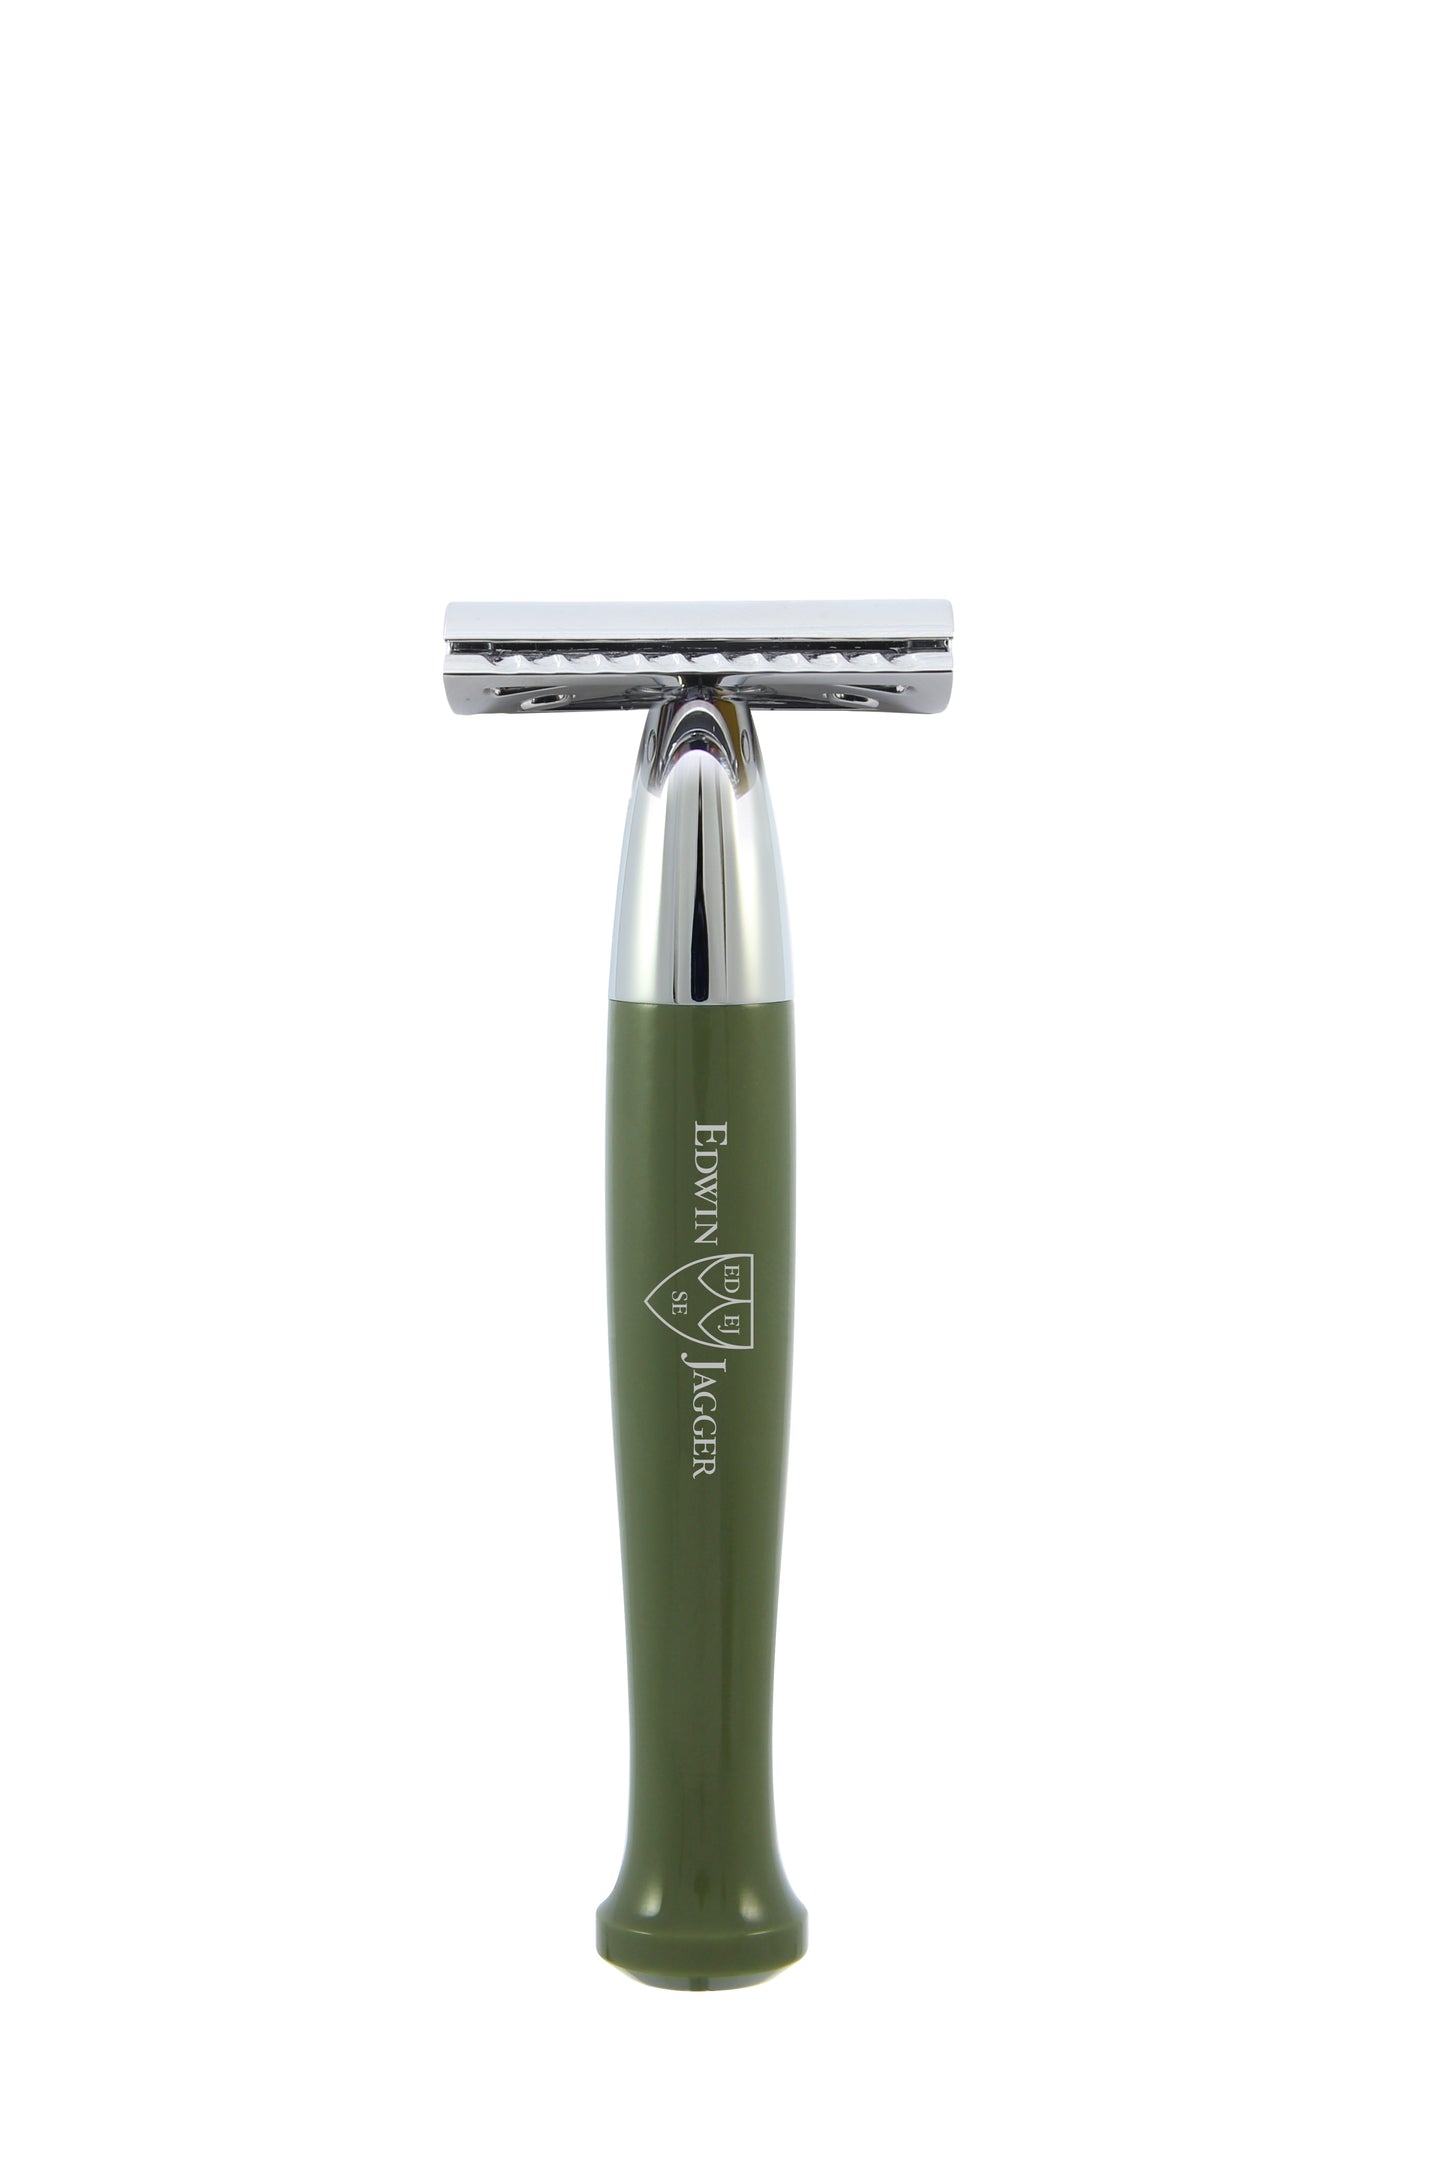 Load image into Gallery viewer, Edwin Jagger Double Edge Safety Razor, Green, Chrome Plated
